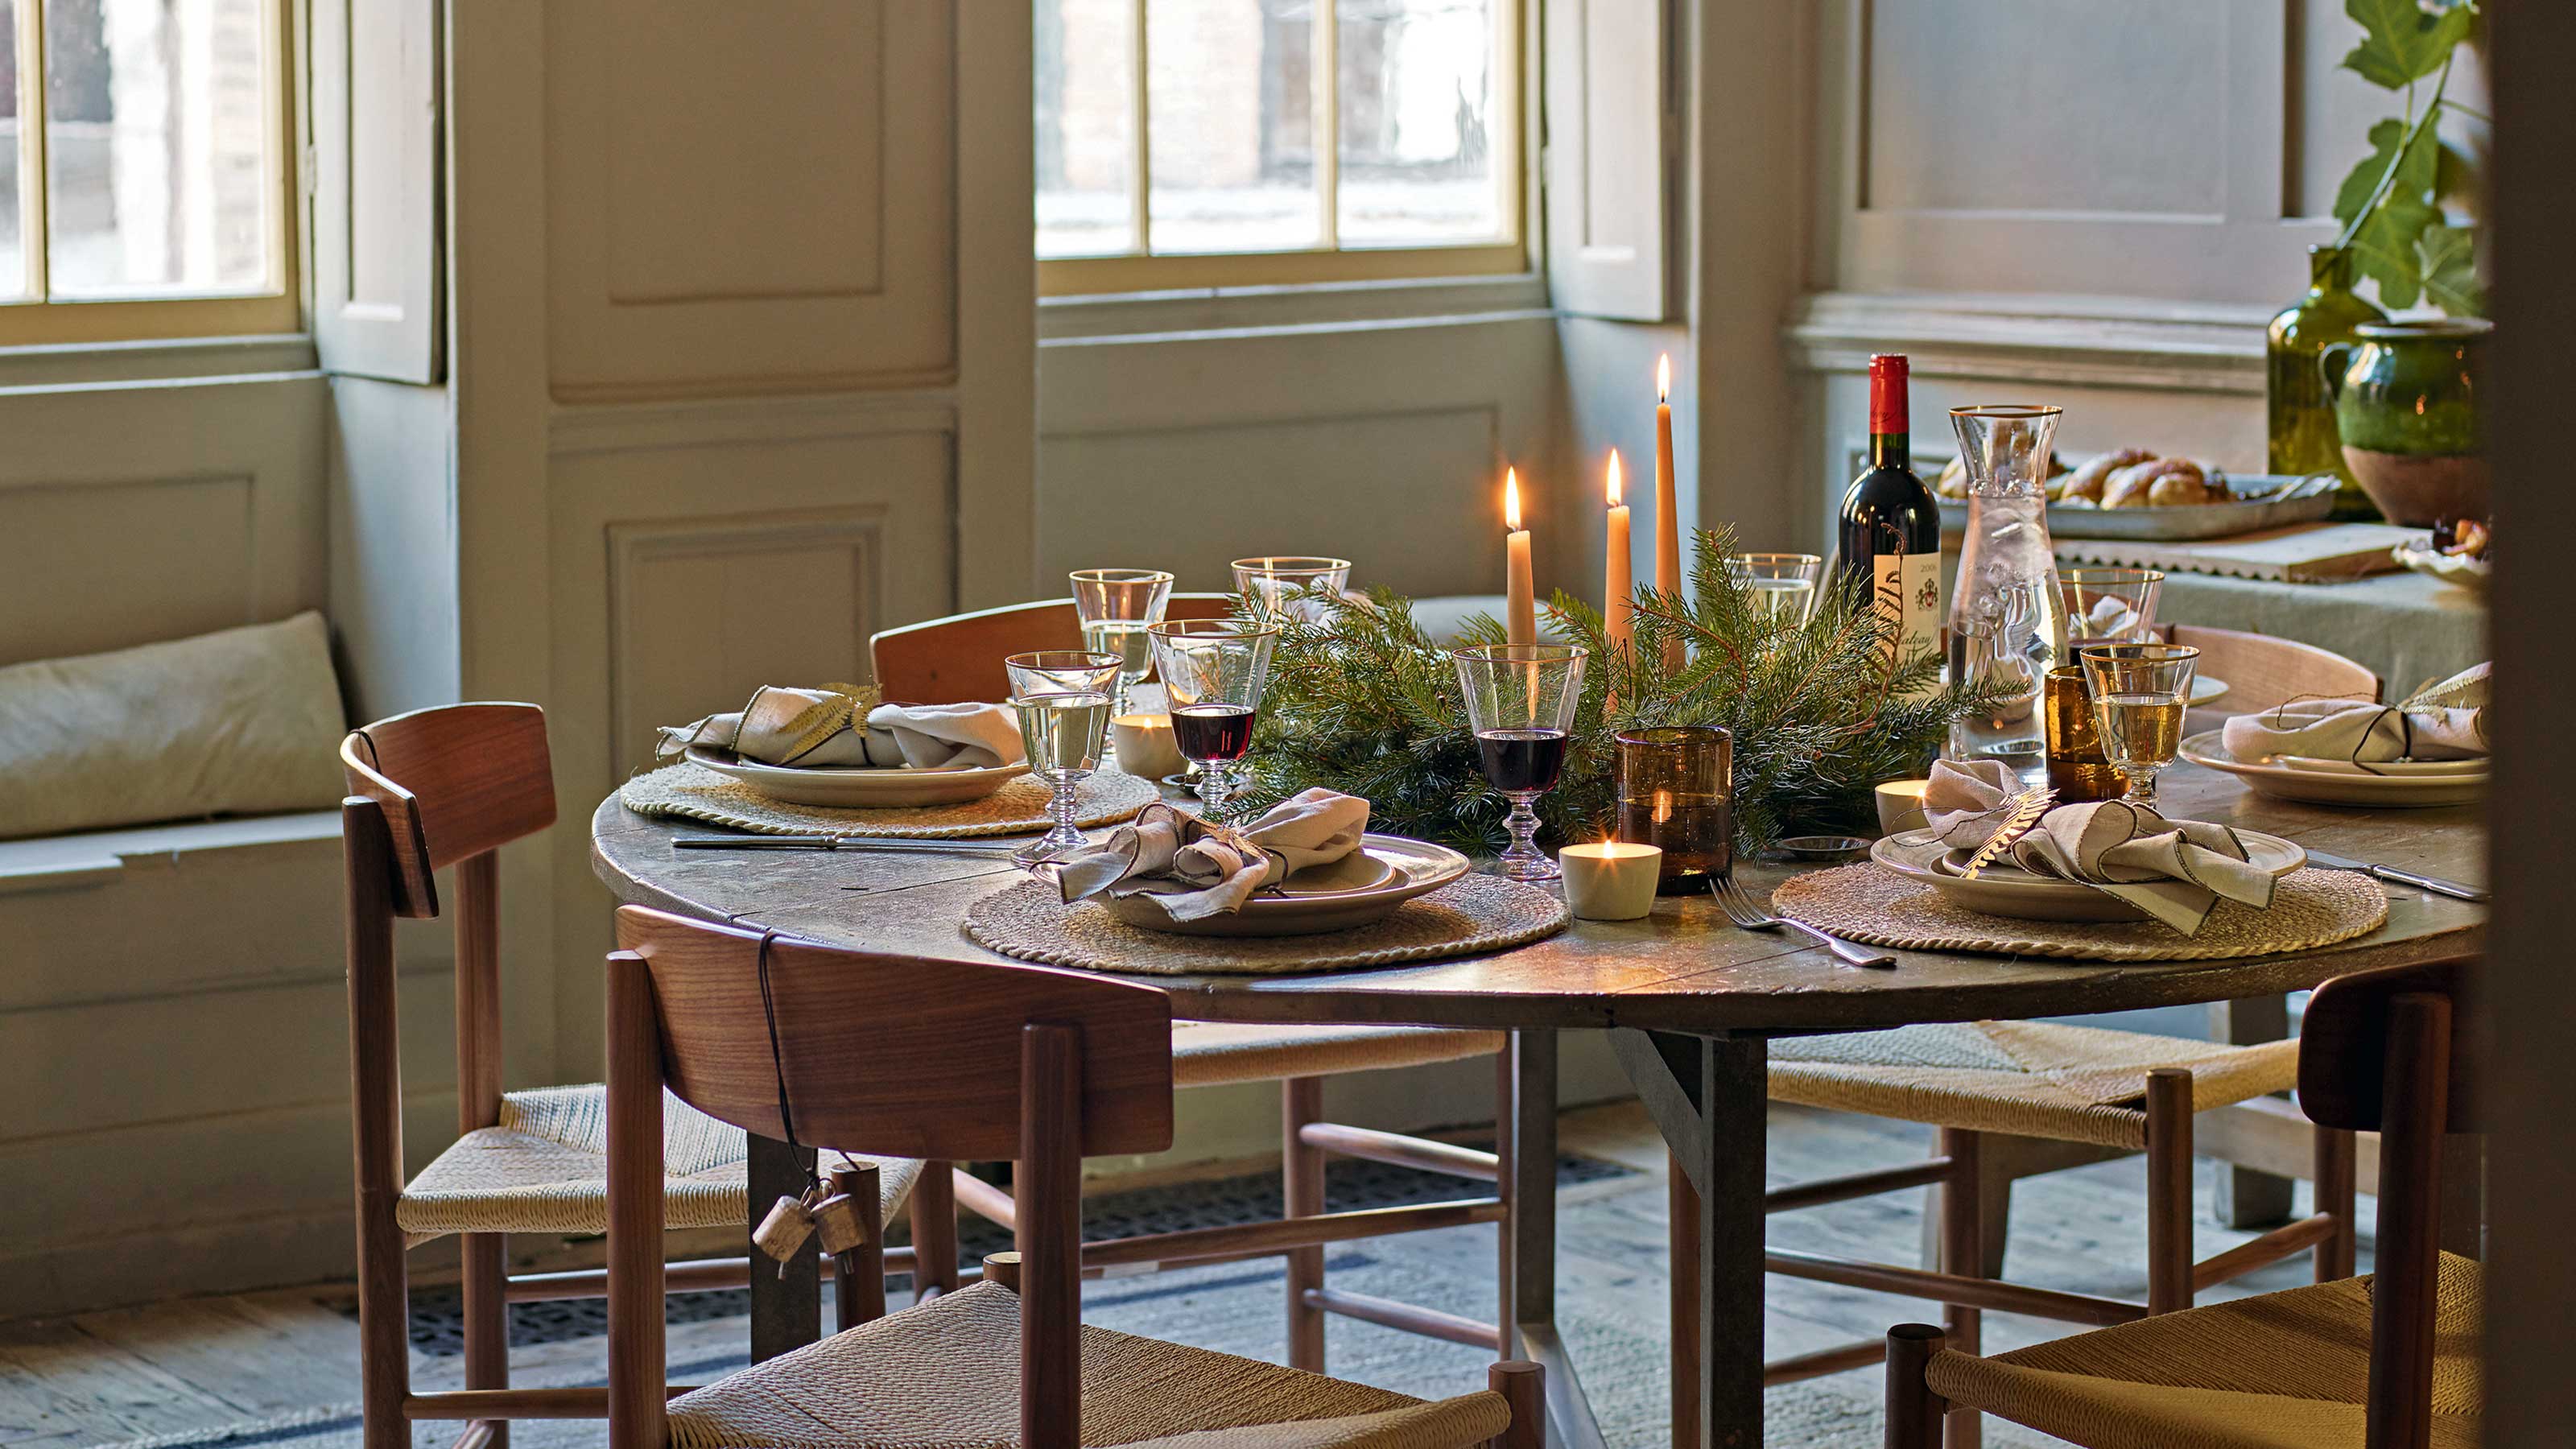 I'm a shopping writer – these are the best dining tables